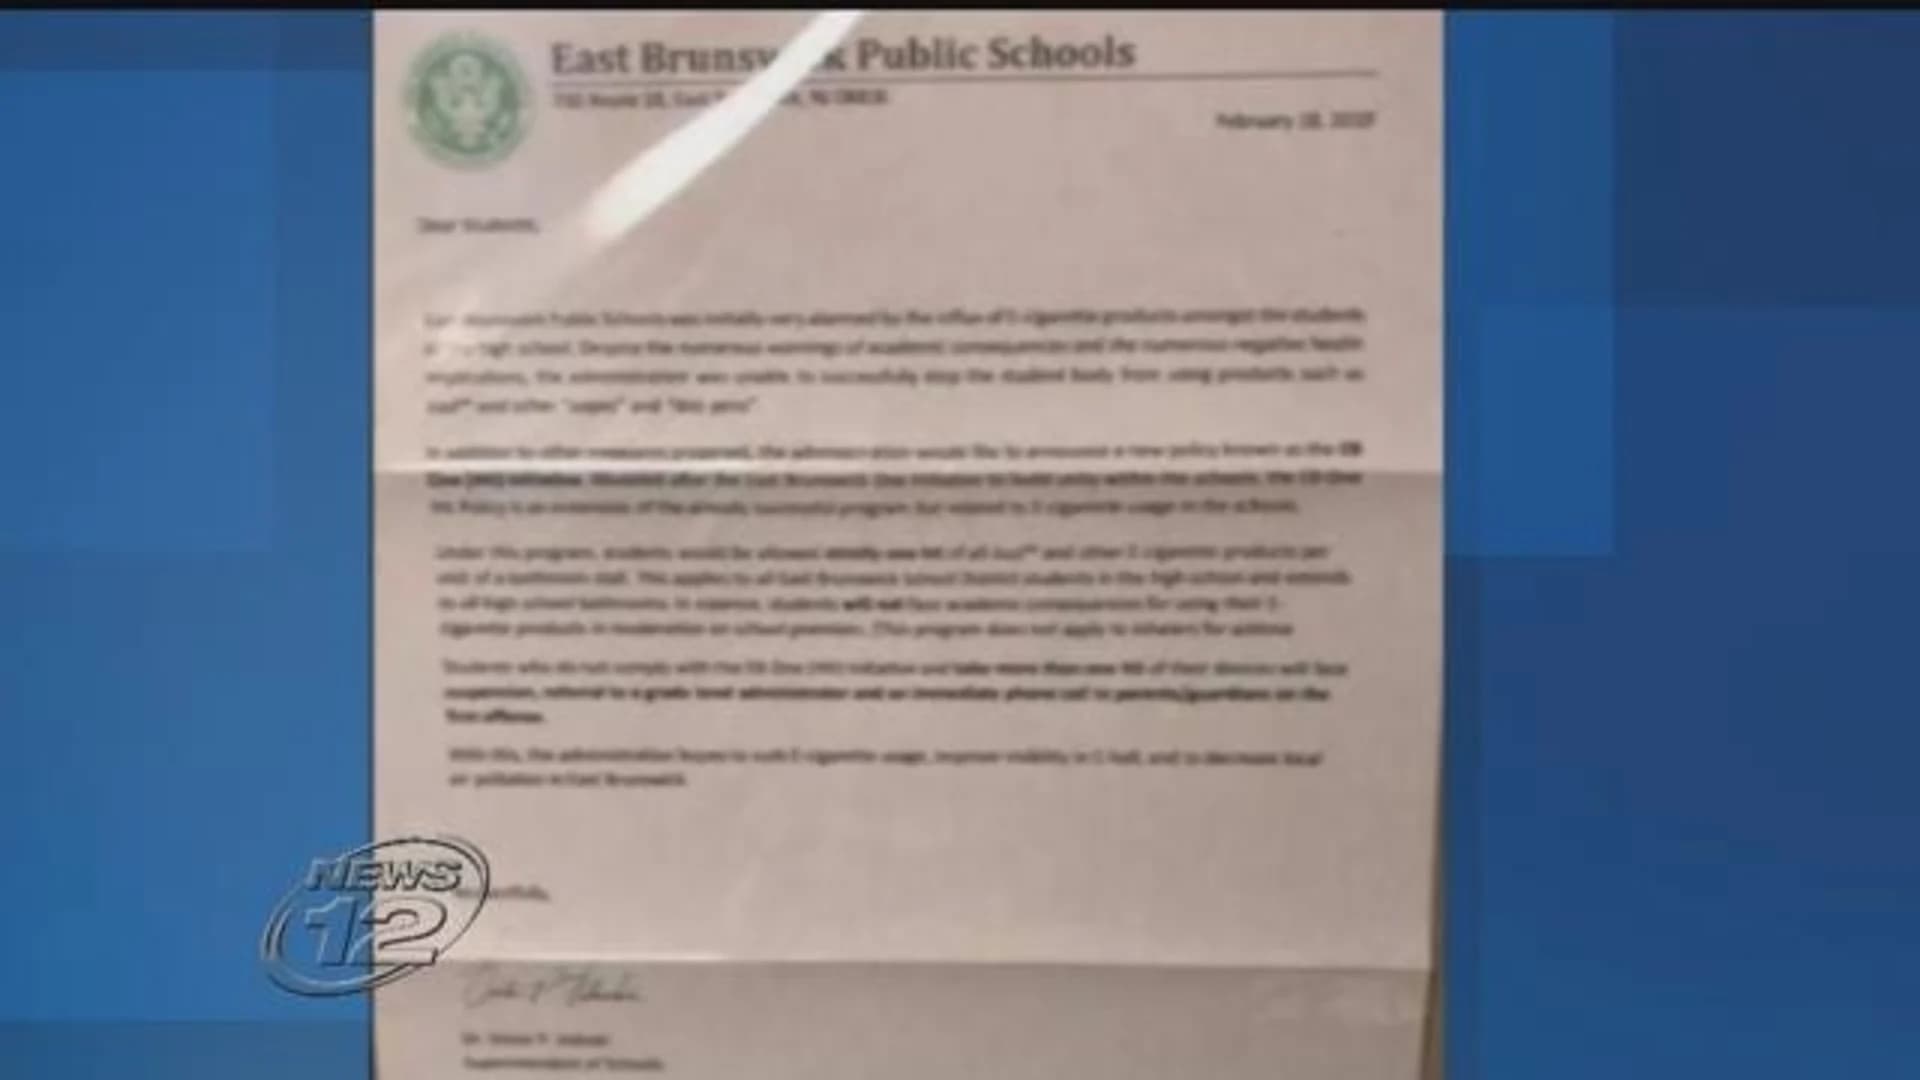 Official: Student admits to forging letter about e-cigarette policy